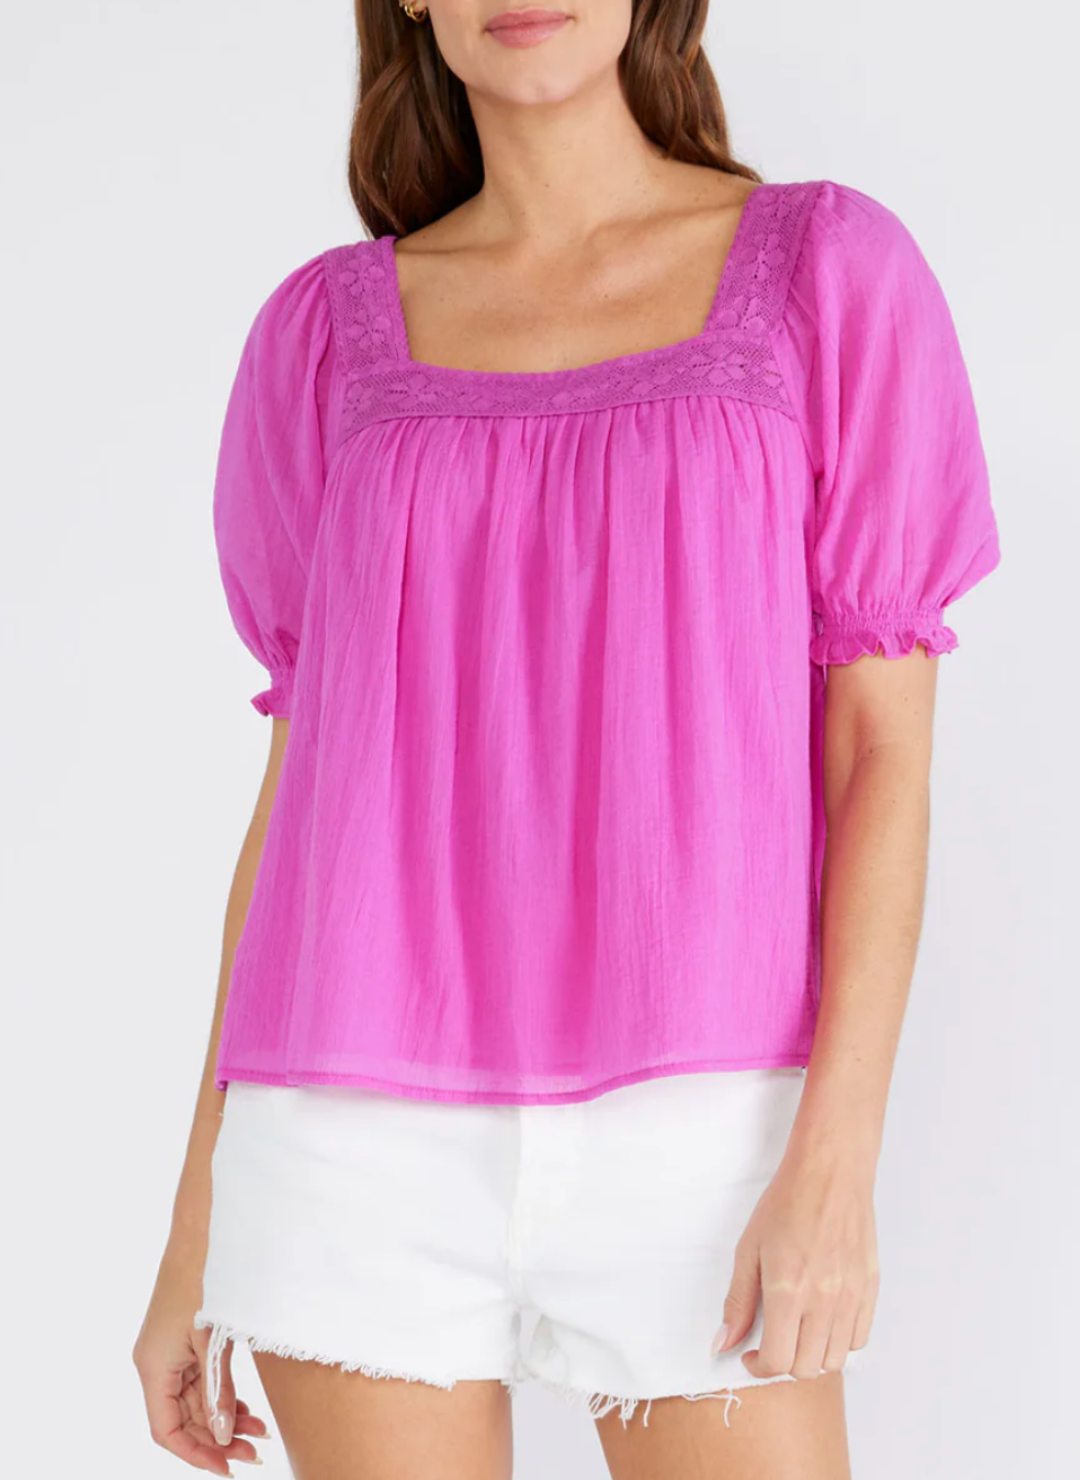 Model wearing fuchsia LS  Perry Puff Sleeve Top with lace square neckline, slight puff in the half sleeve and a fully lined bodice styled with white shorts.